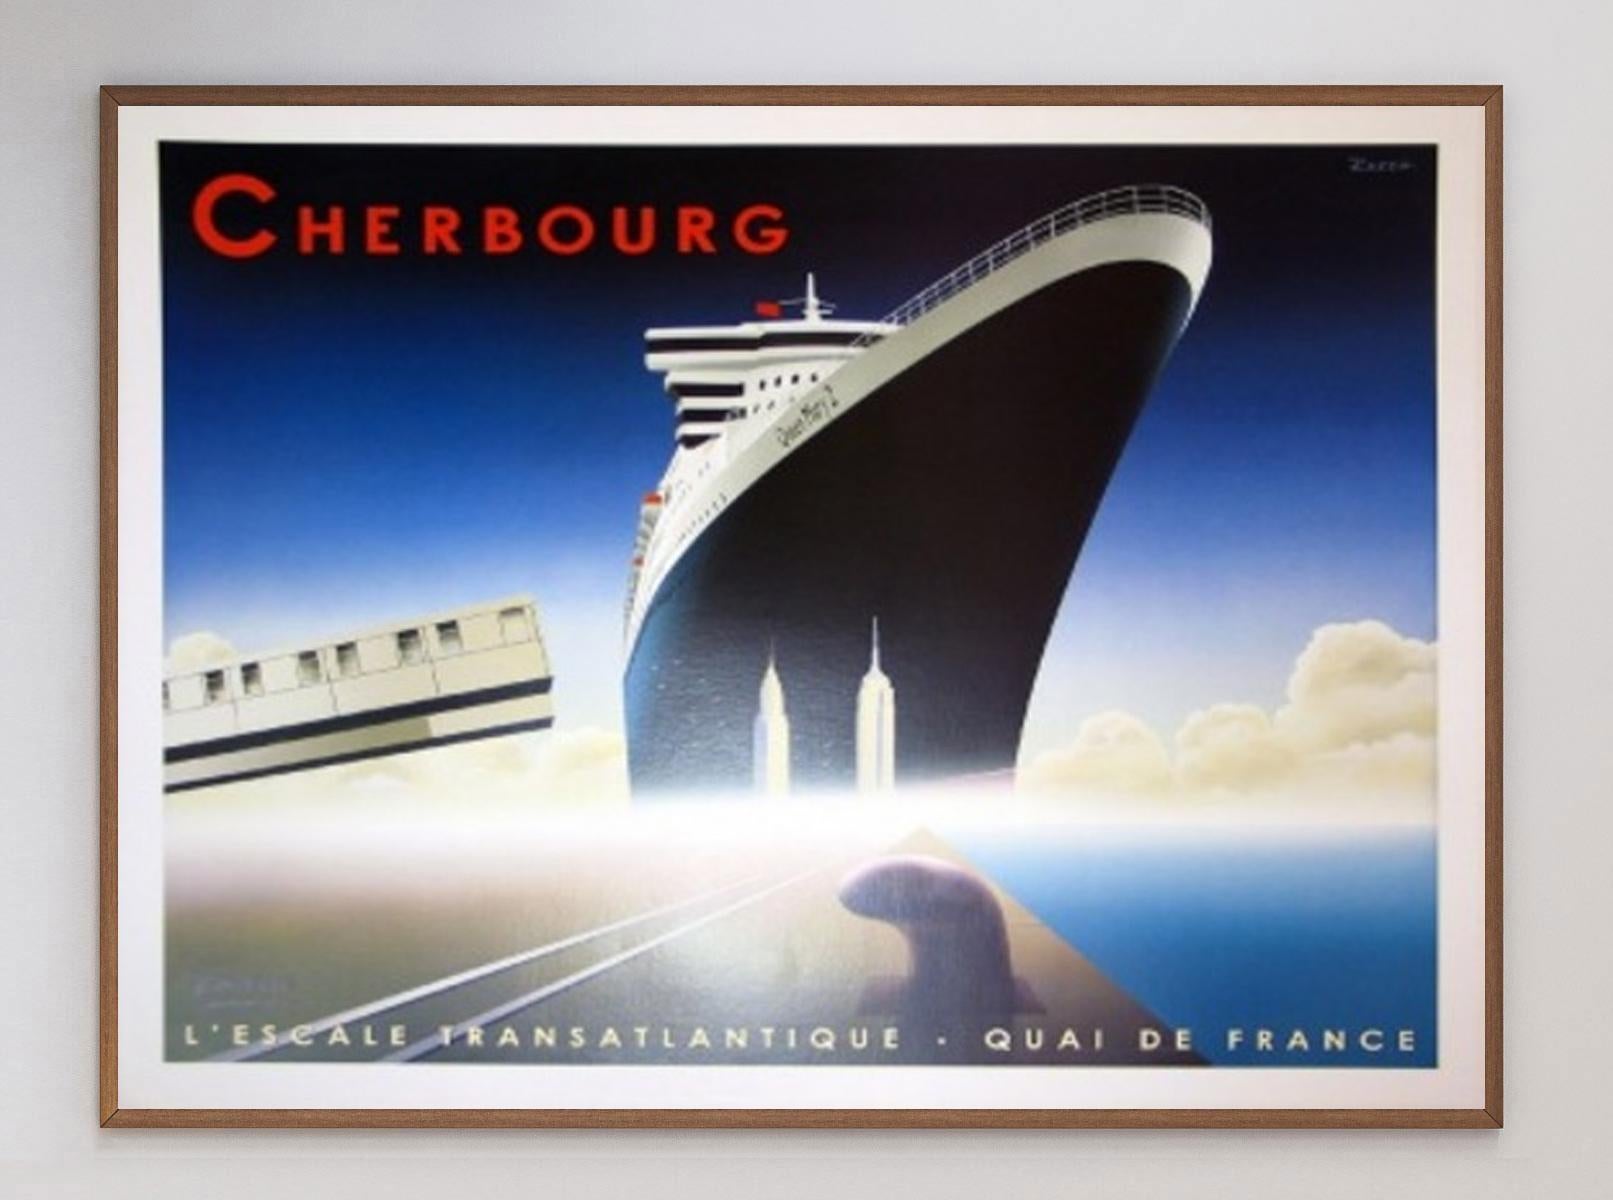 Stunning art deco poster featuring artwork from the renowned poster artist Gerard Courbouleix better known as Razzia. Created in 2002, it depicts the Queen Mary II which was soon to have its maiden voyage, and reads 